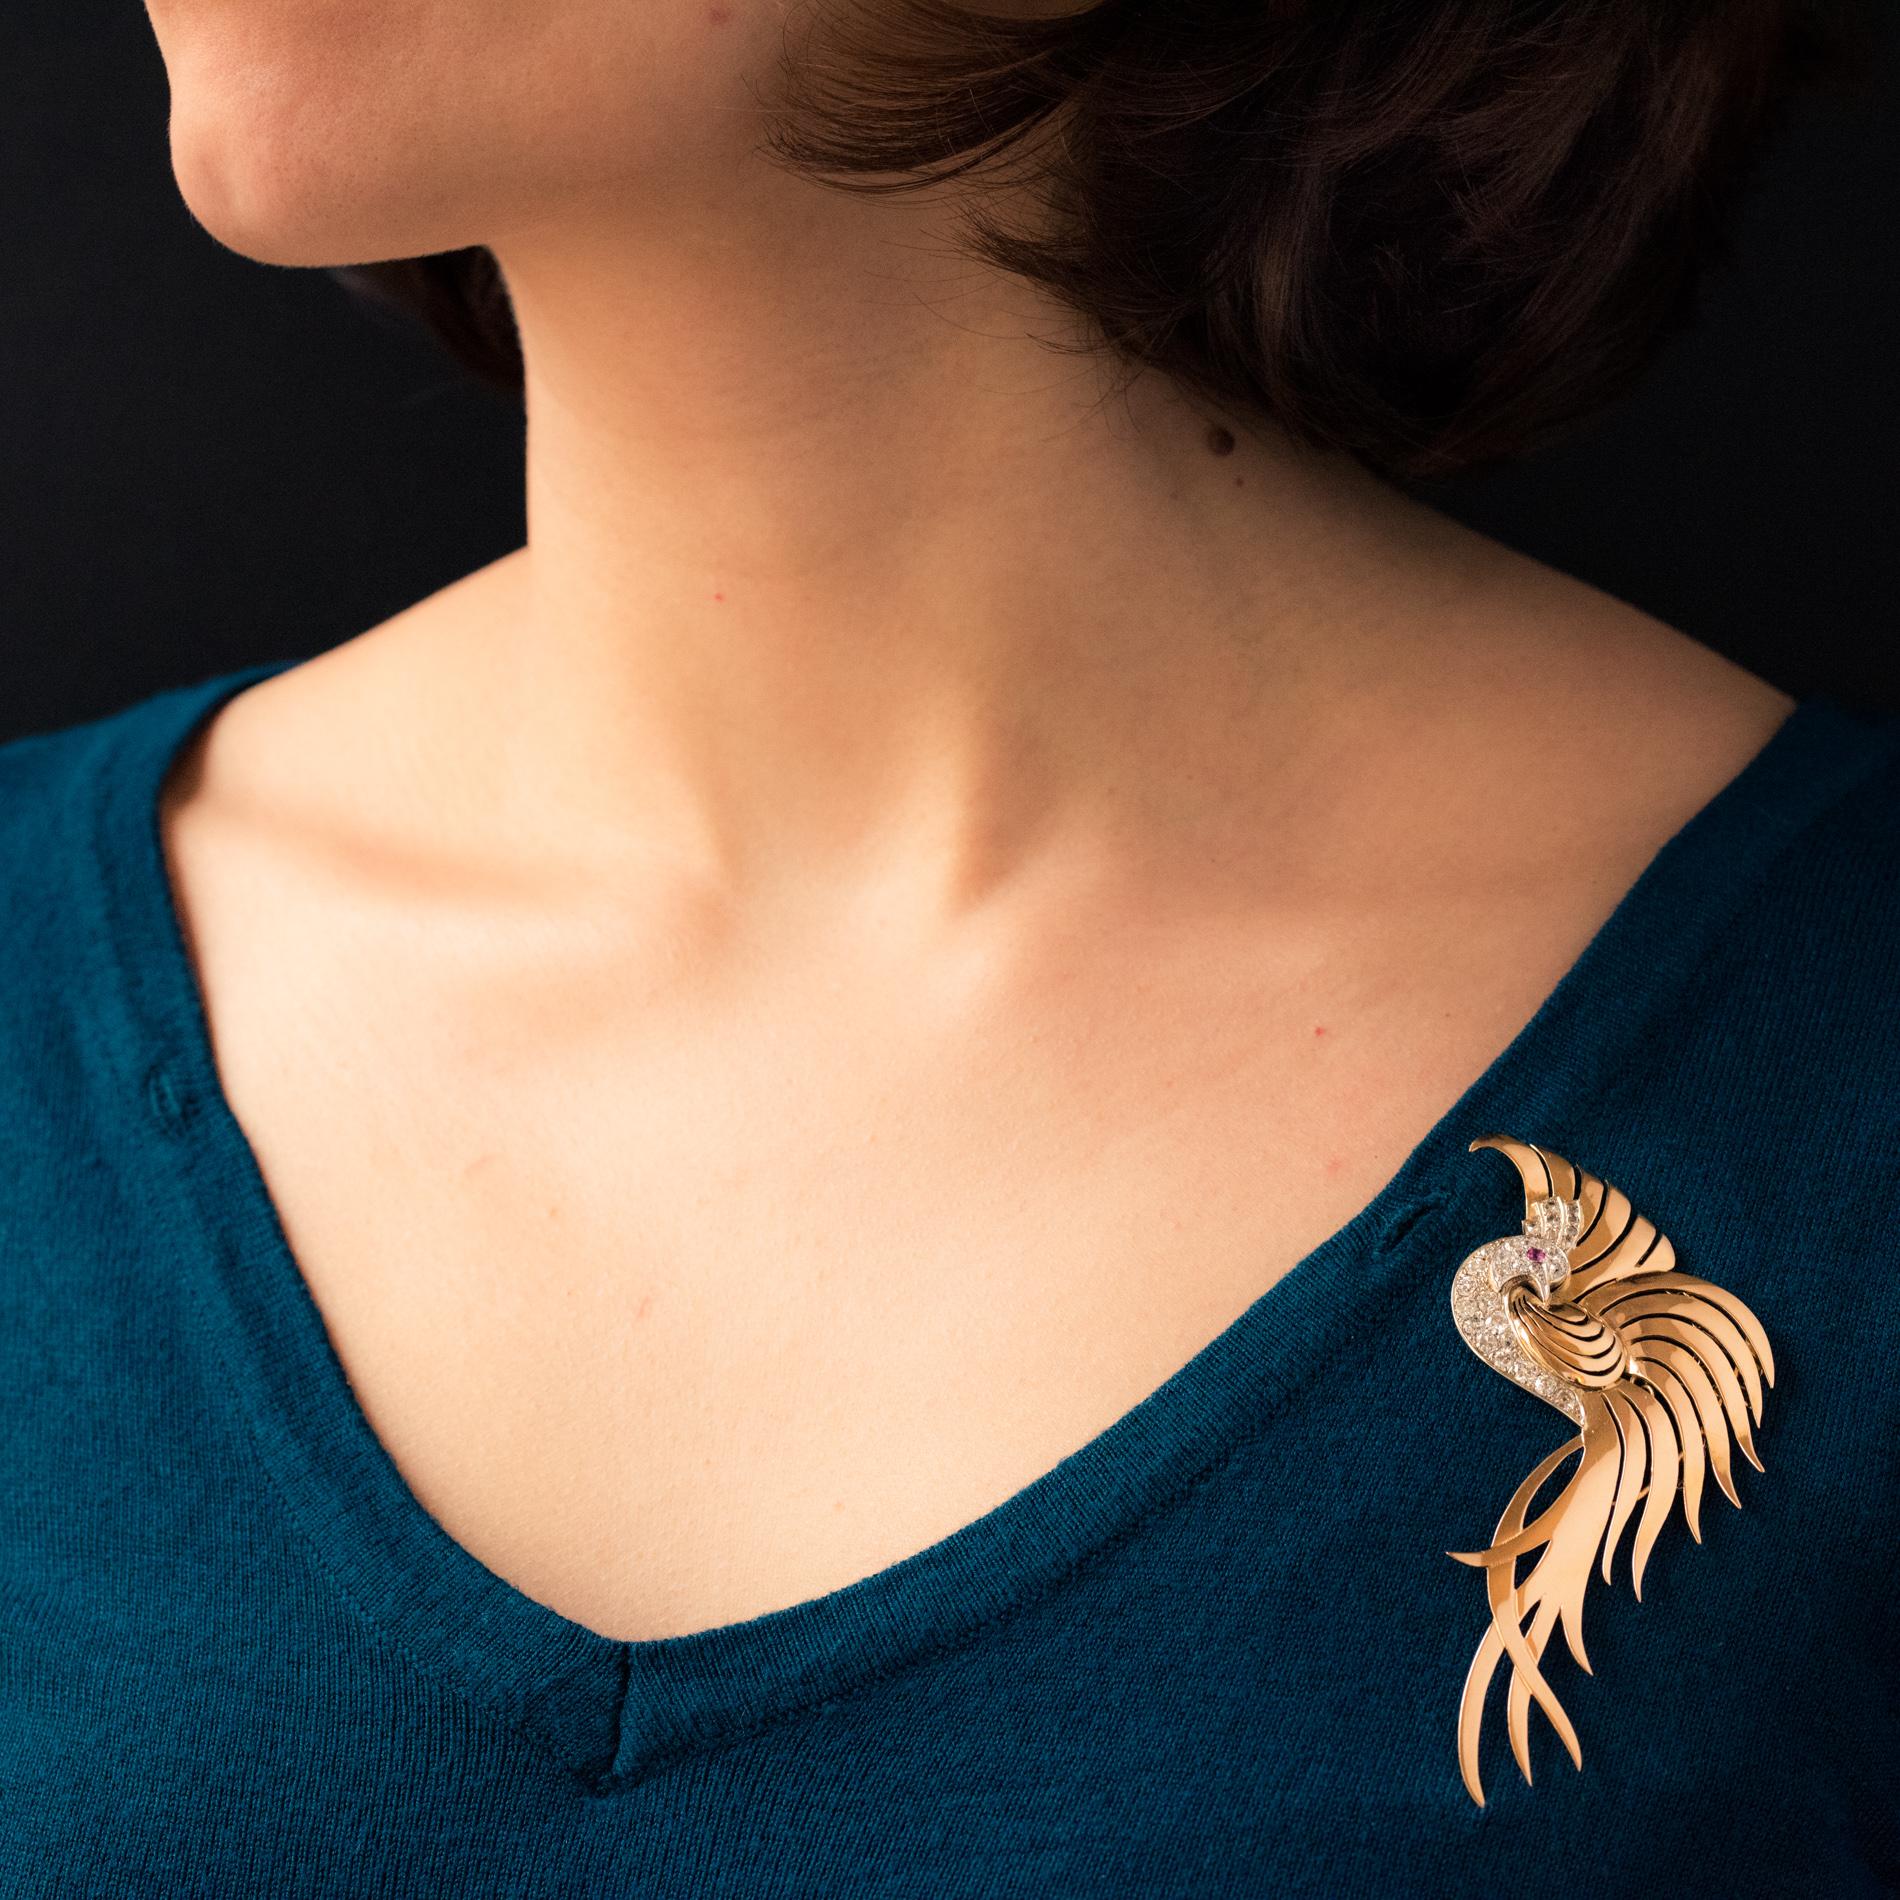 Brooch in 18 karat yellow gold, eagle's head hallmark and platinum.
This splendid bestiary brooch represents a bird of paradise whose body is set with antique brilliant-cut diamonds, with a ruby eye. The whole body is surrounded by openwork plumage.